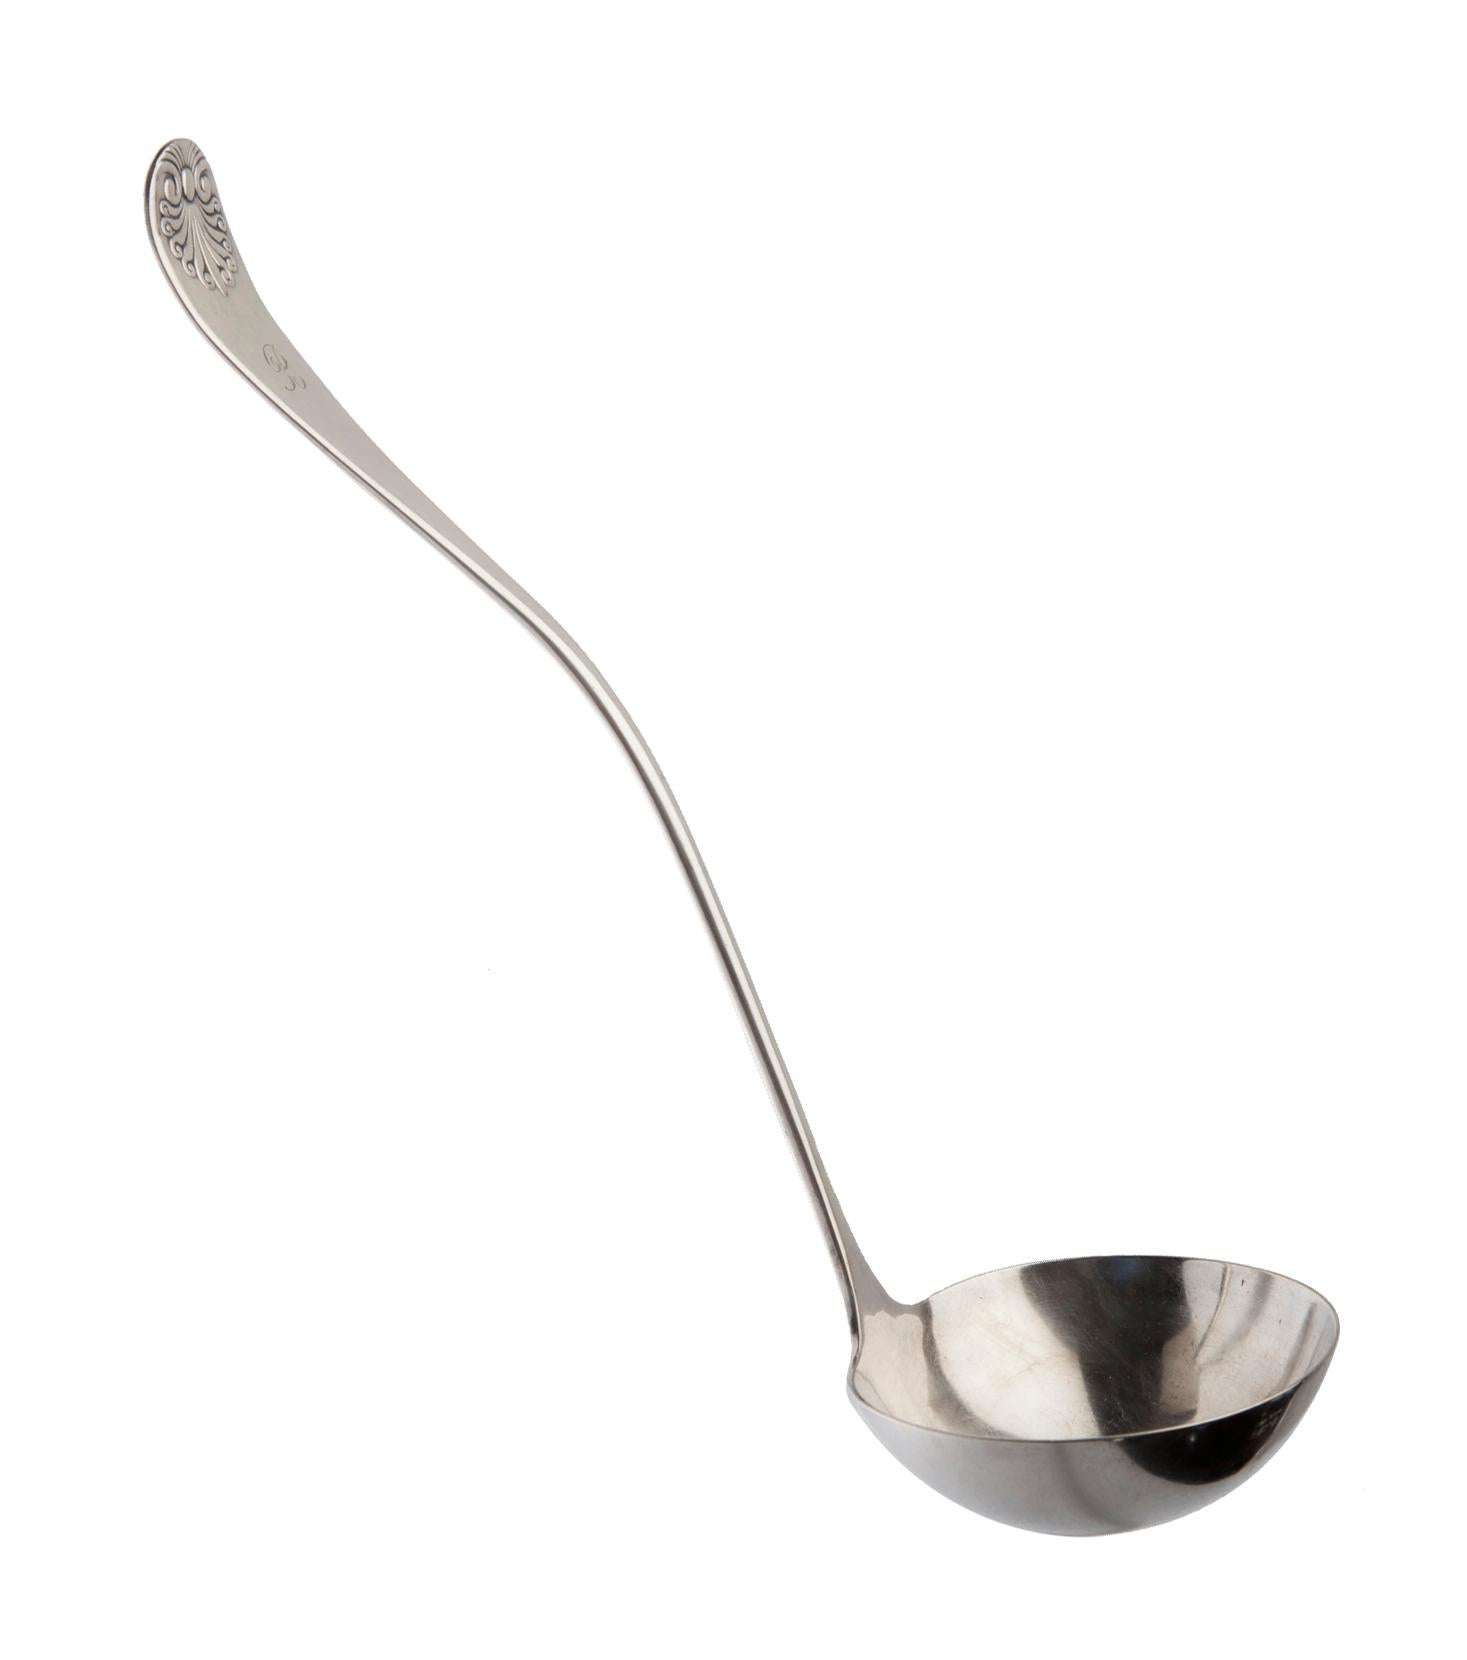 American Classical Vintage Silverplate Ladle / Shell & Monogram B For Sale